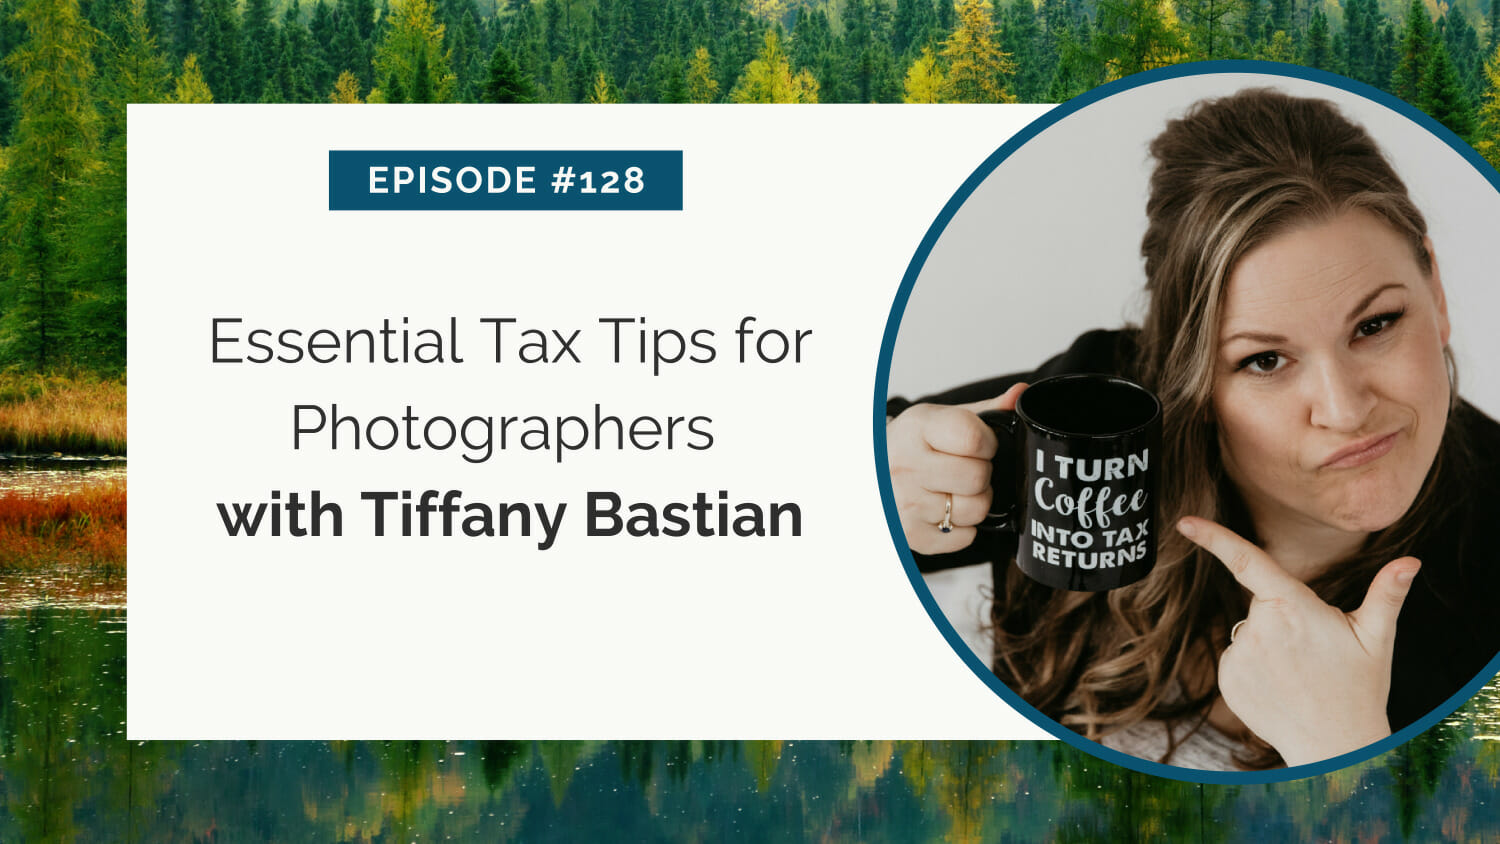 Woman sharing tax tips for photographers in a podcast episode.